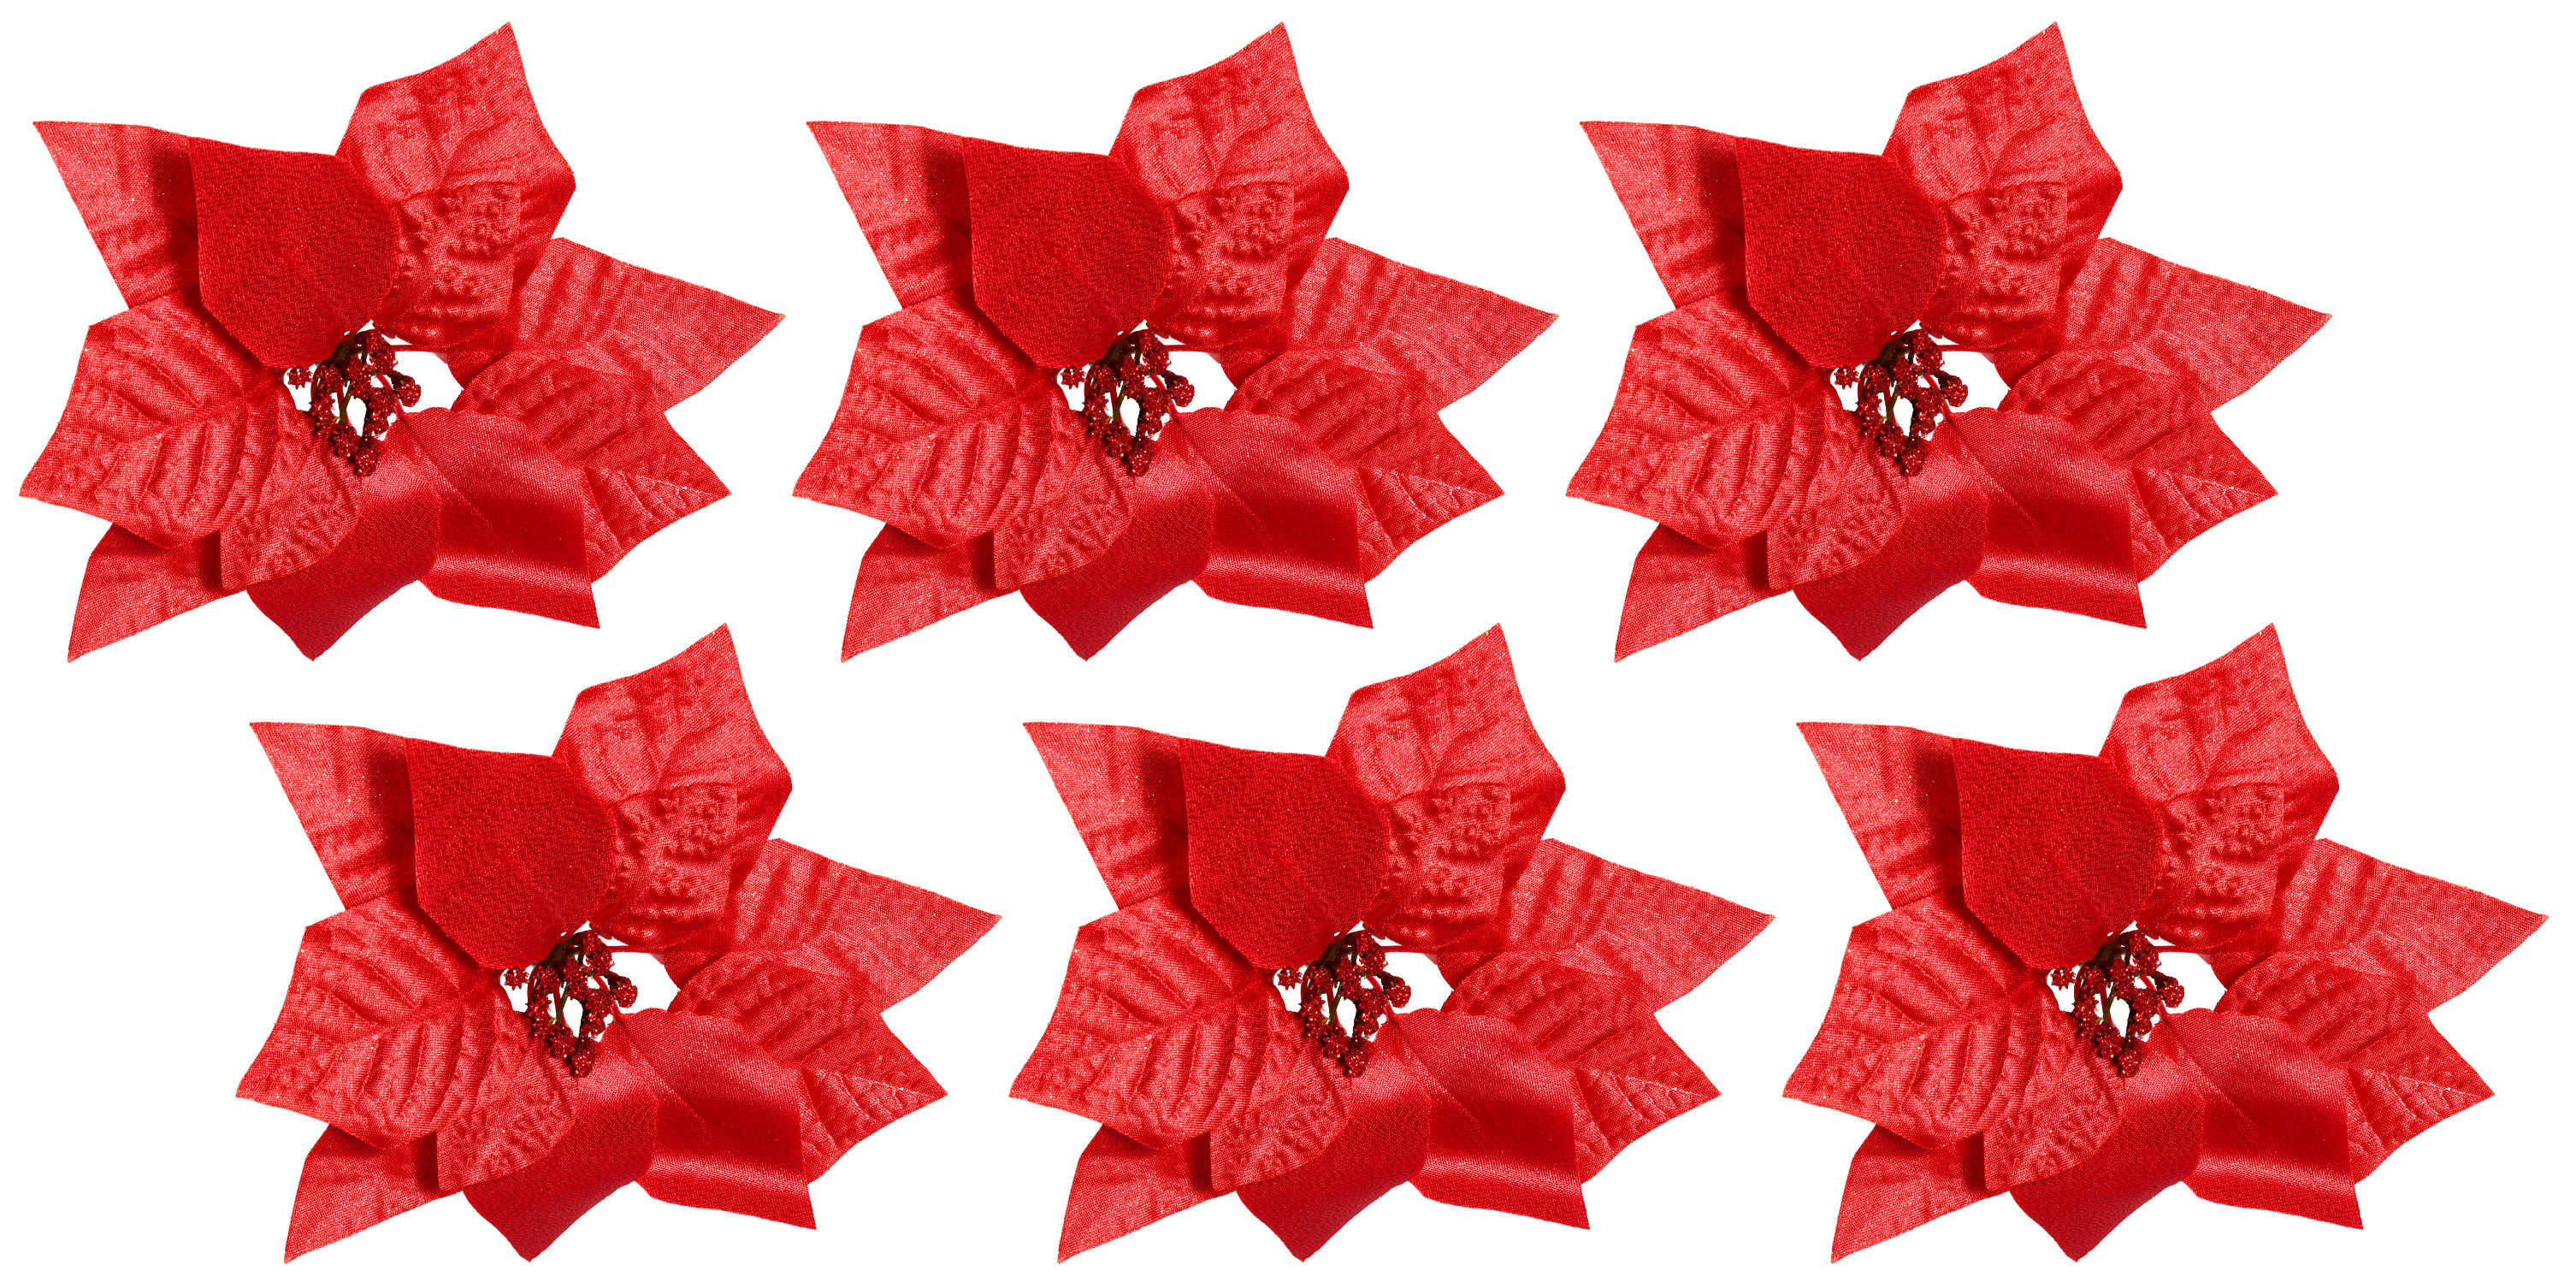 Clip On Red 21cm Poinsettia Flower Christmas Tree Decorations (Set of 6)